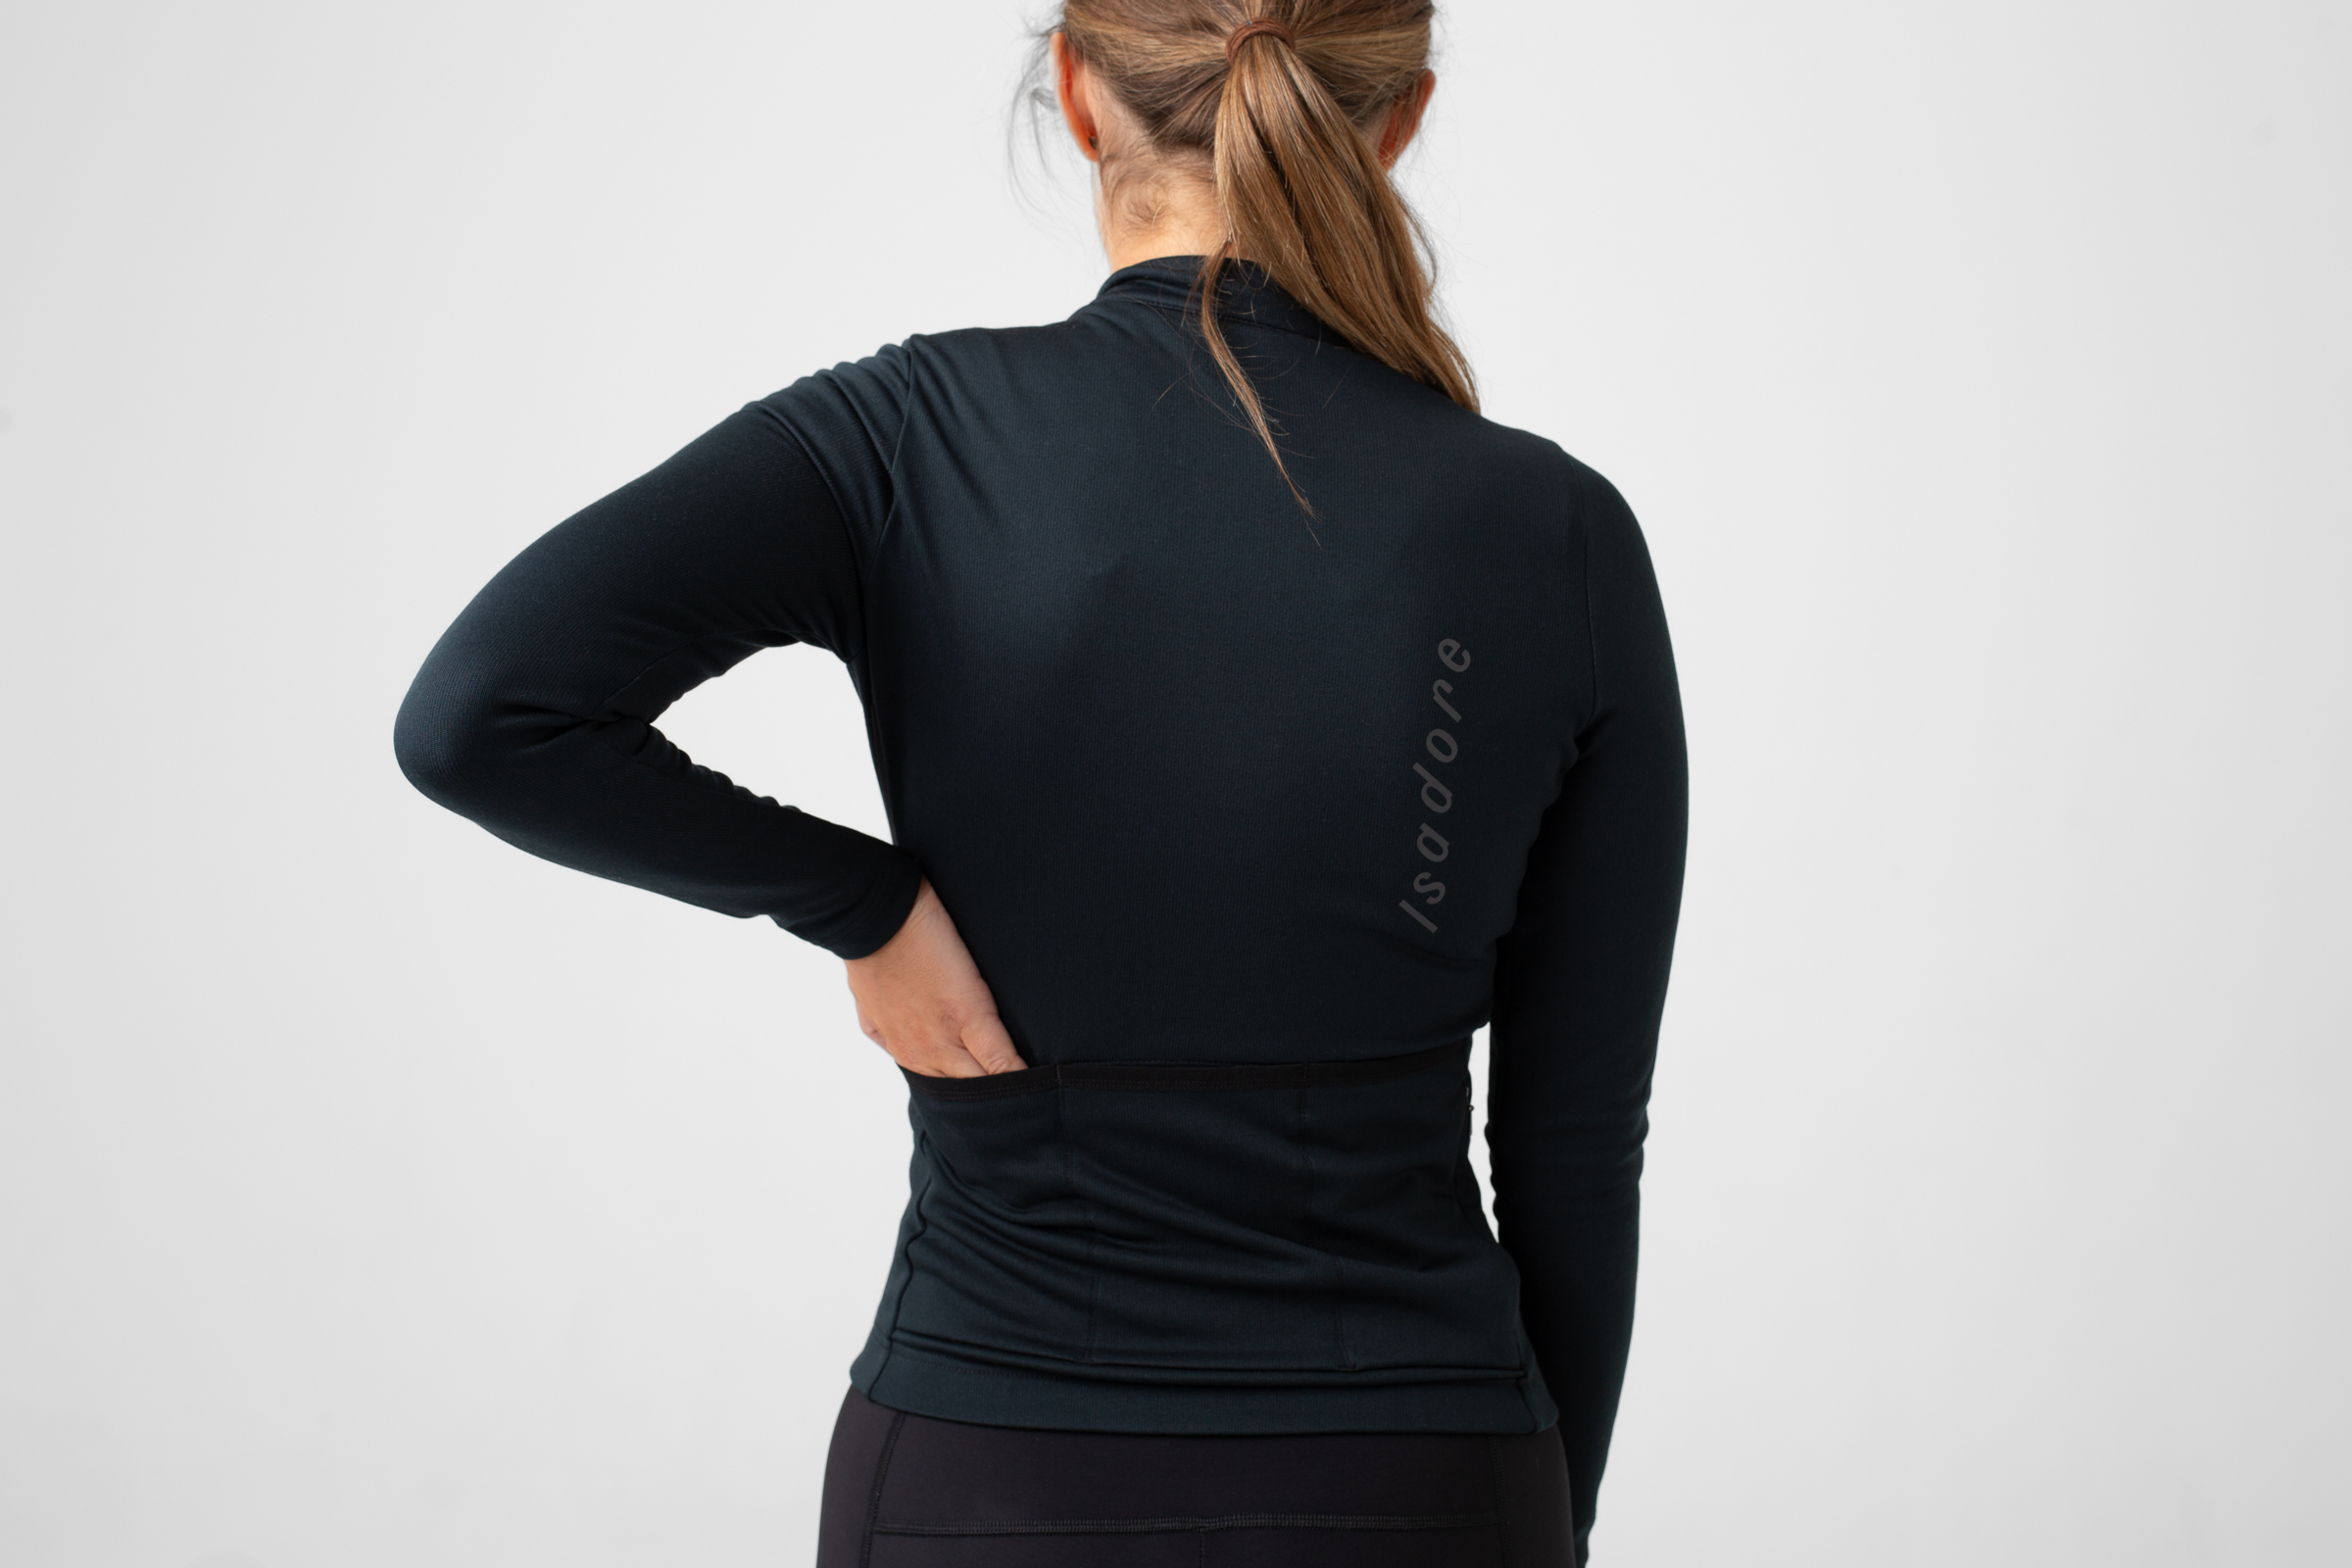 Women's Signature Thermal Long Sleeve Jersey Anthracite